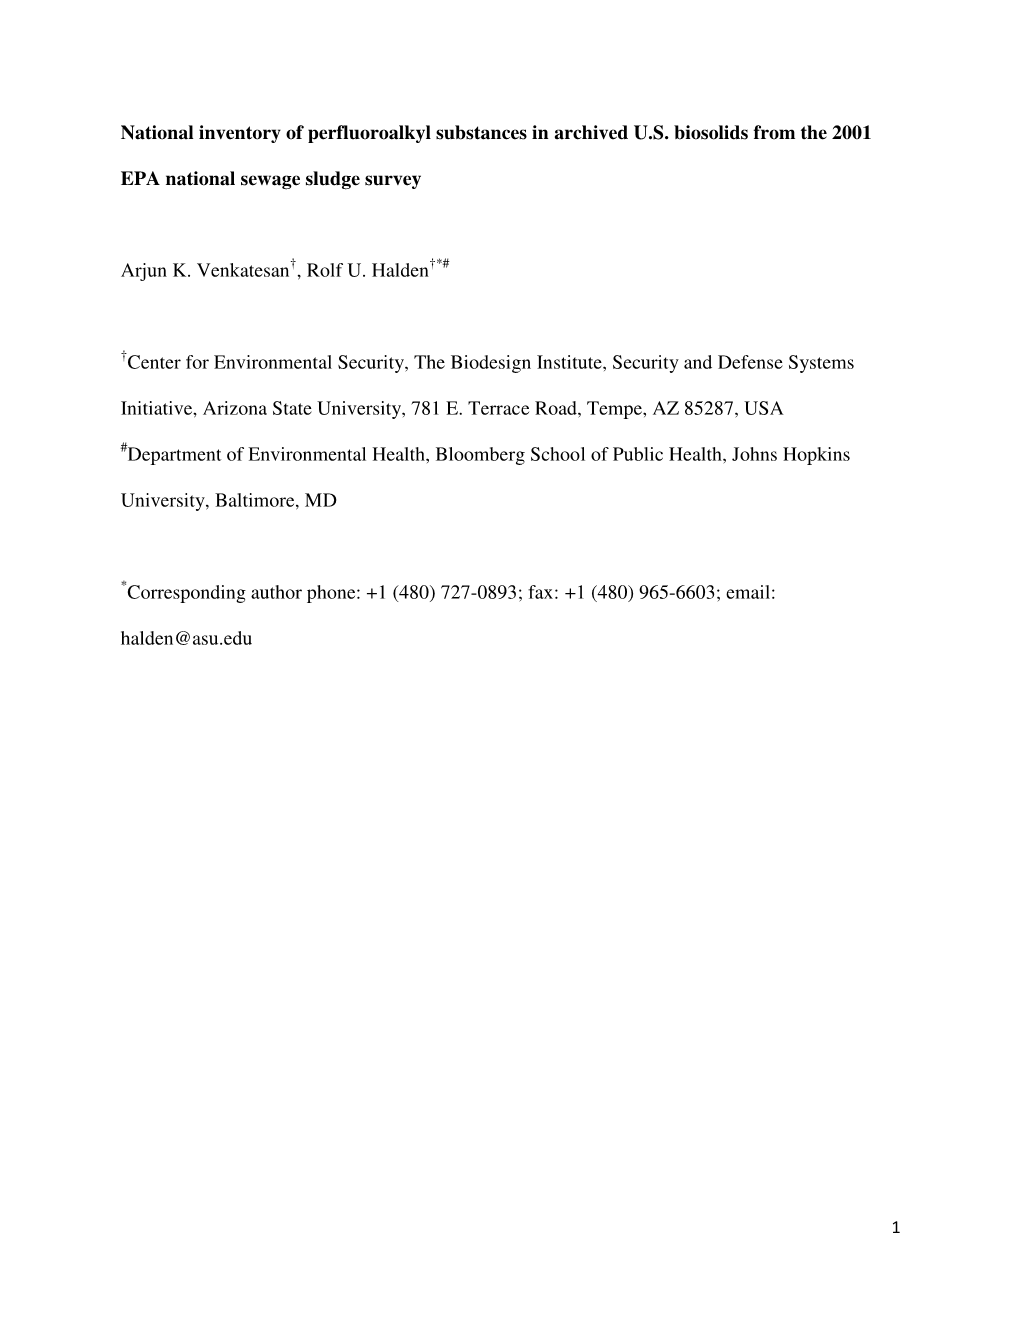 National Inventory of Perfluoroalkyl Substances in Archived U.S. Biosolids from the 2001